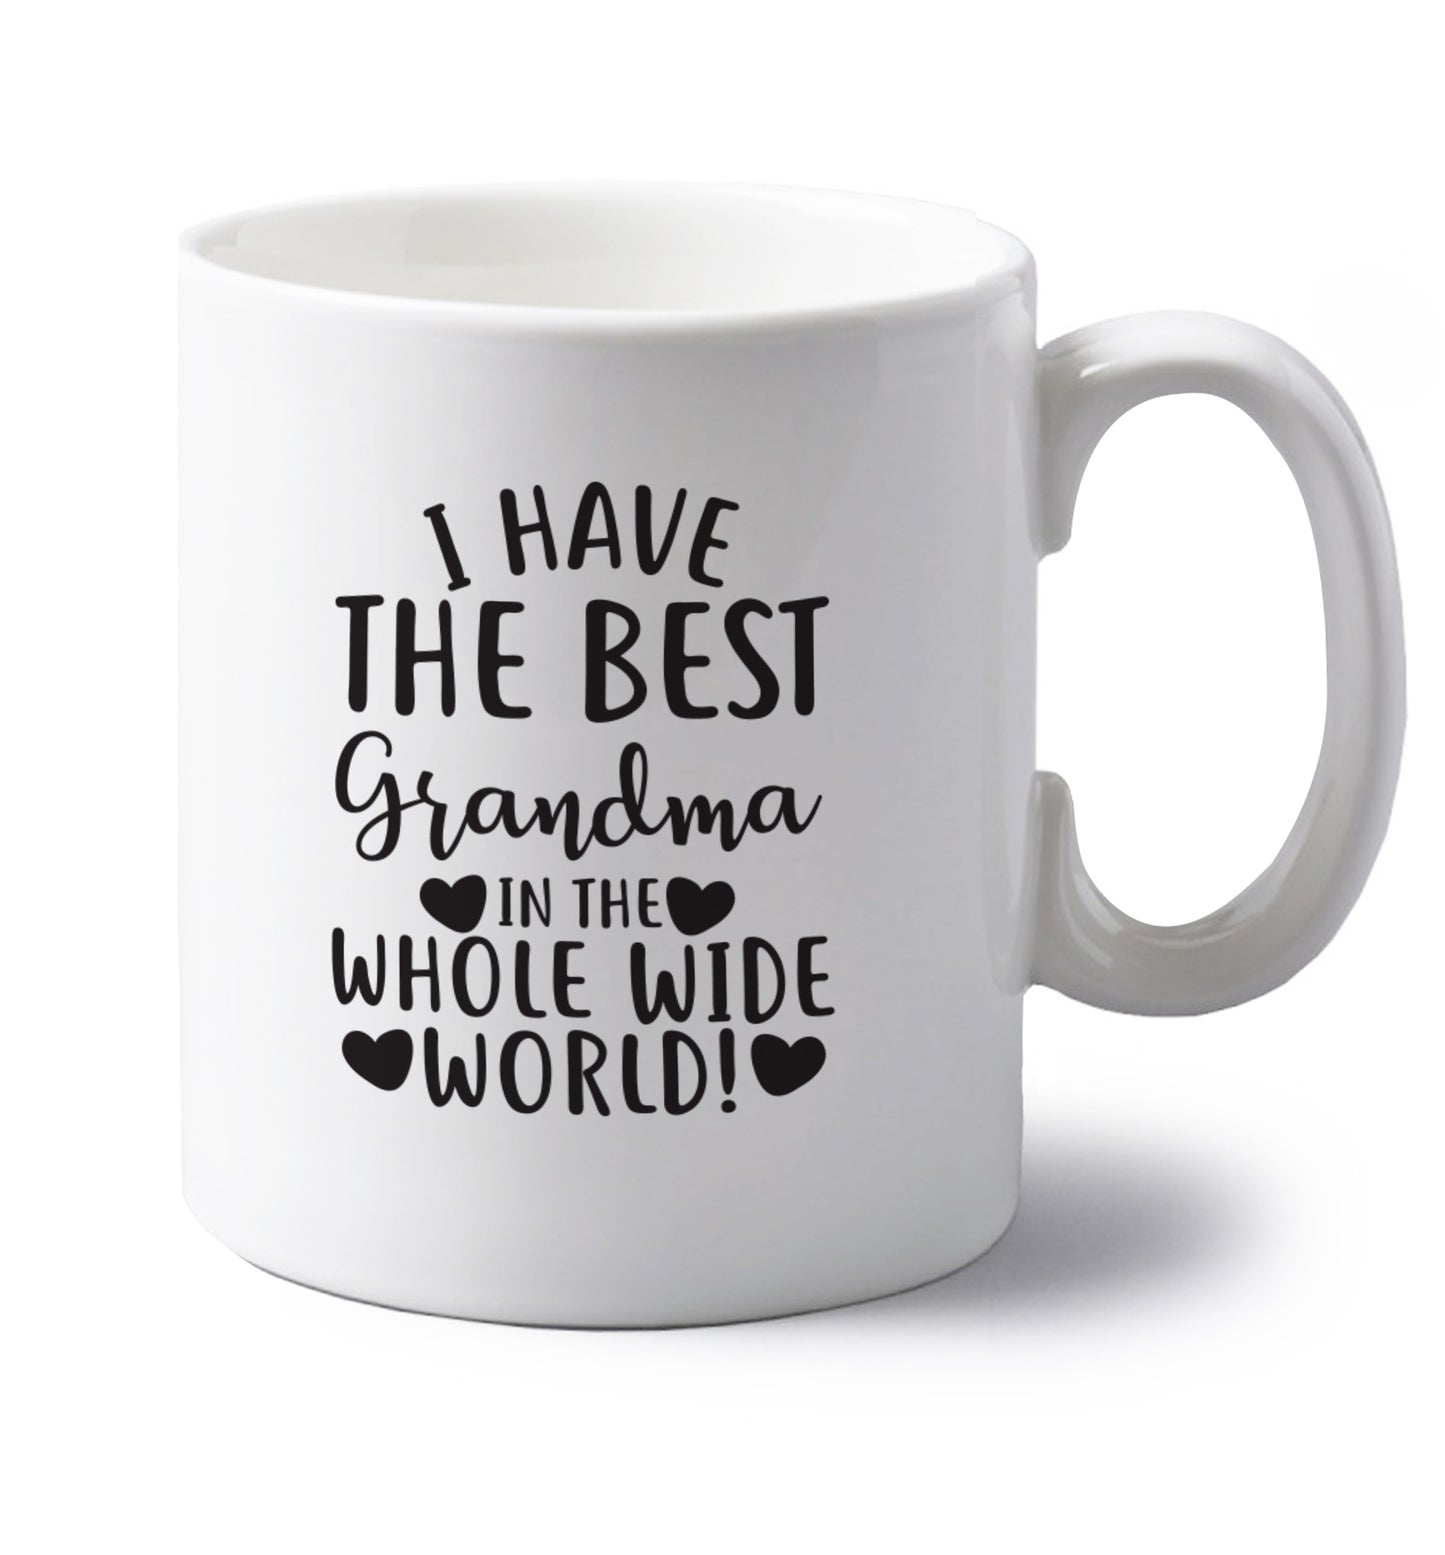 I have the best grandma in the whole wide world! left handed white ceramic mug 